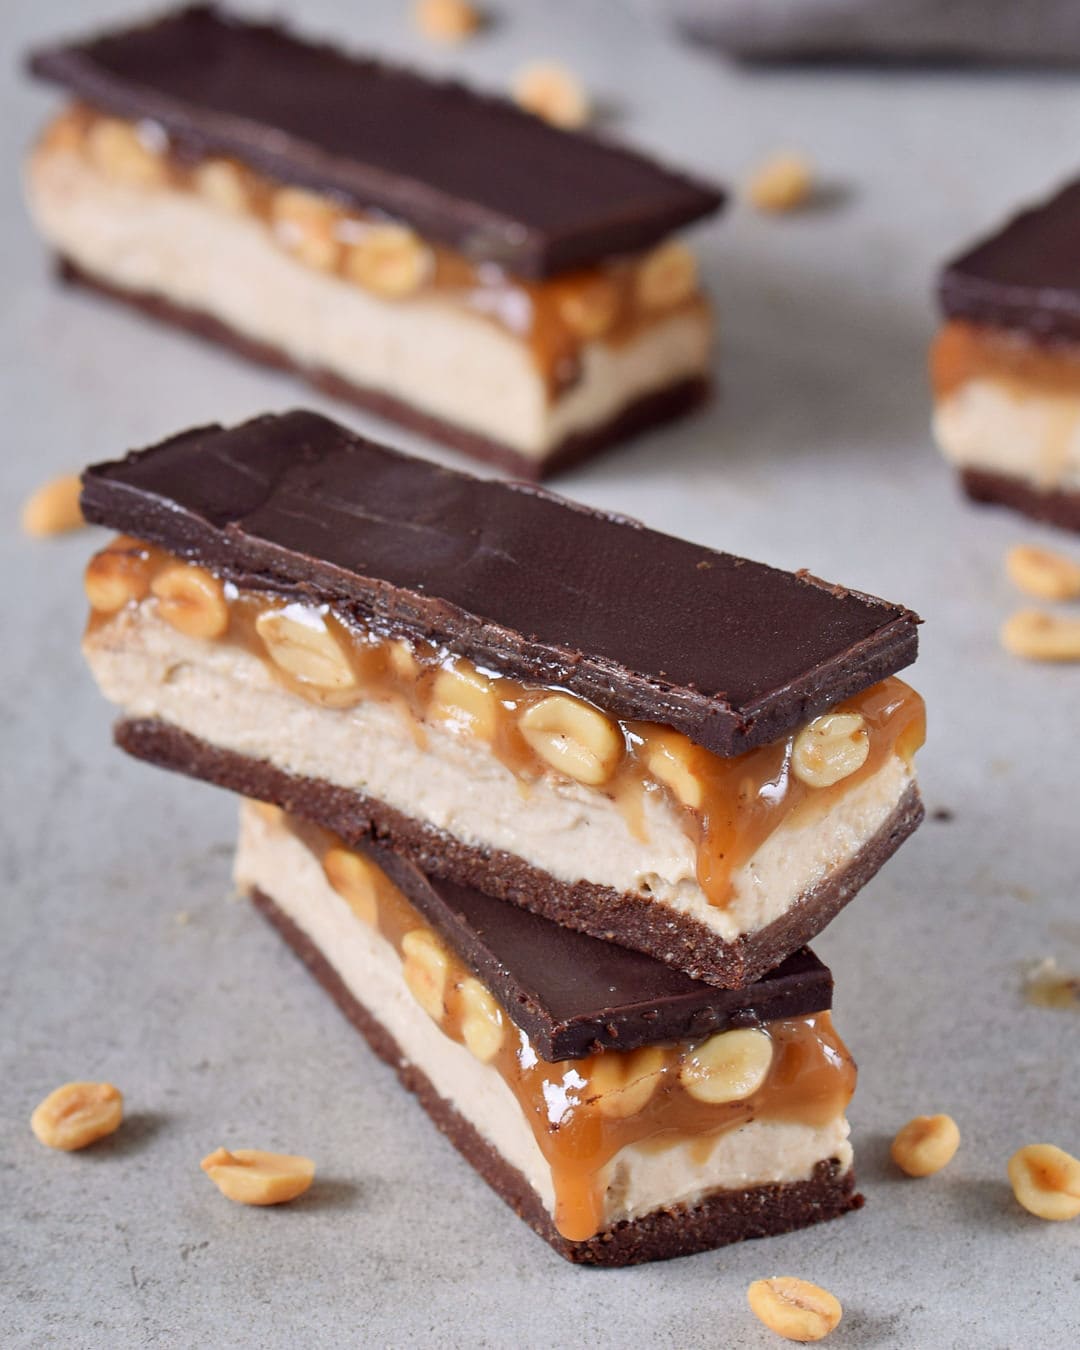 Stack of homemade caramel chocolate candy bars with a brownie base, cashew cream, peanut caramel and dairy-free chocolate